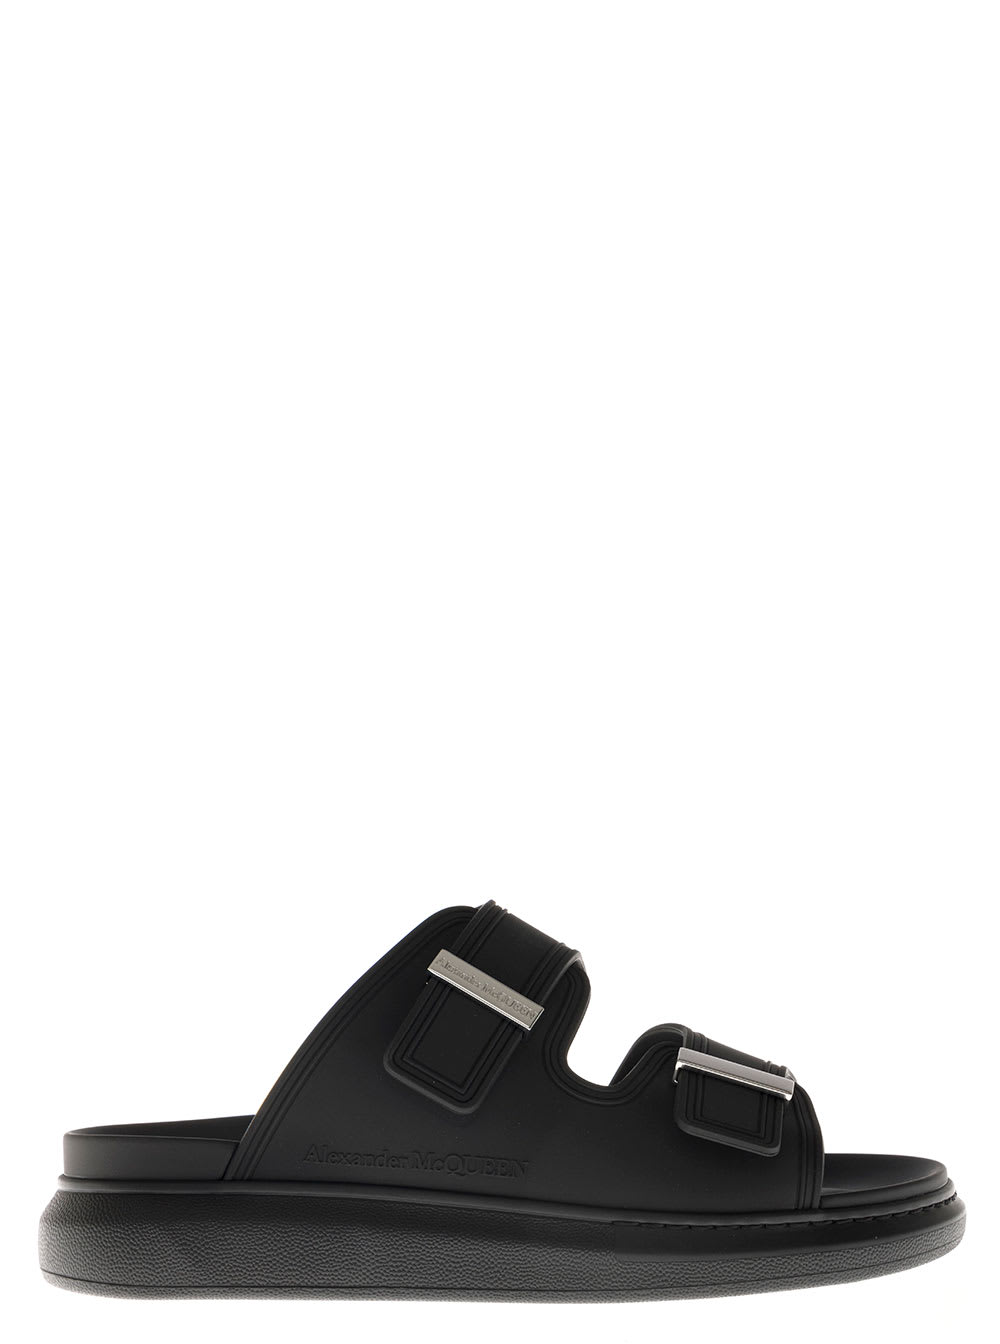 Alexander Mcqueen Black Rubber Sandals With Buckles In Pewter | ModeSens